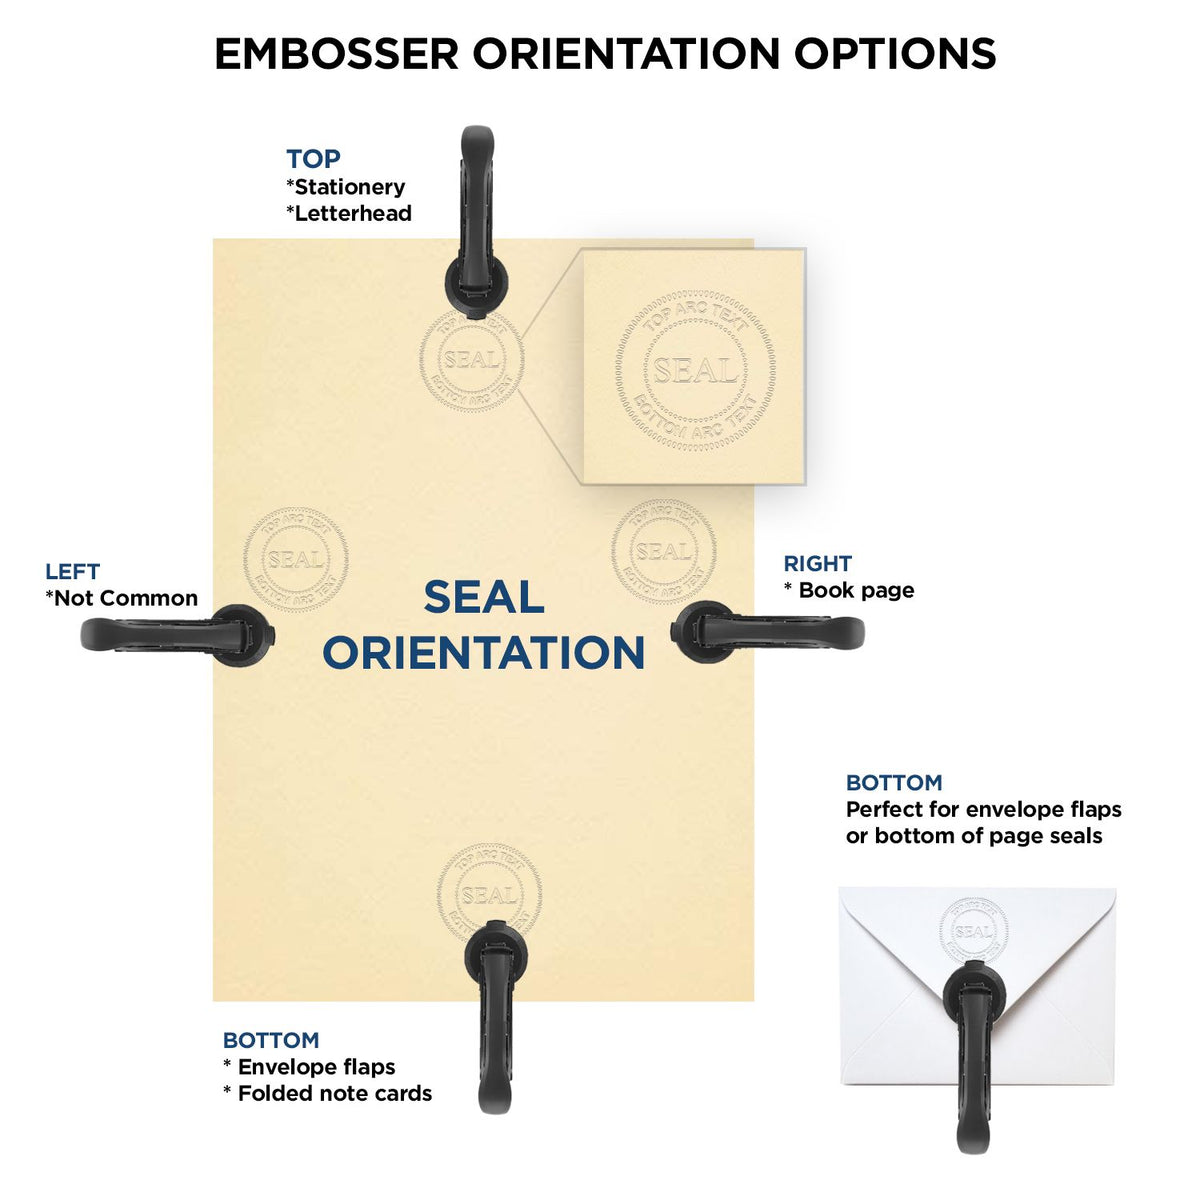 An infographic for the Gift Maine Geologist Seal showing embosser orientation, this is showing examples of a top, bottom, right and left insert.